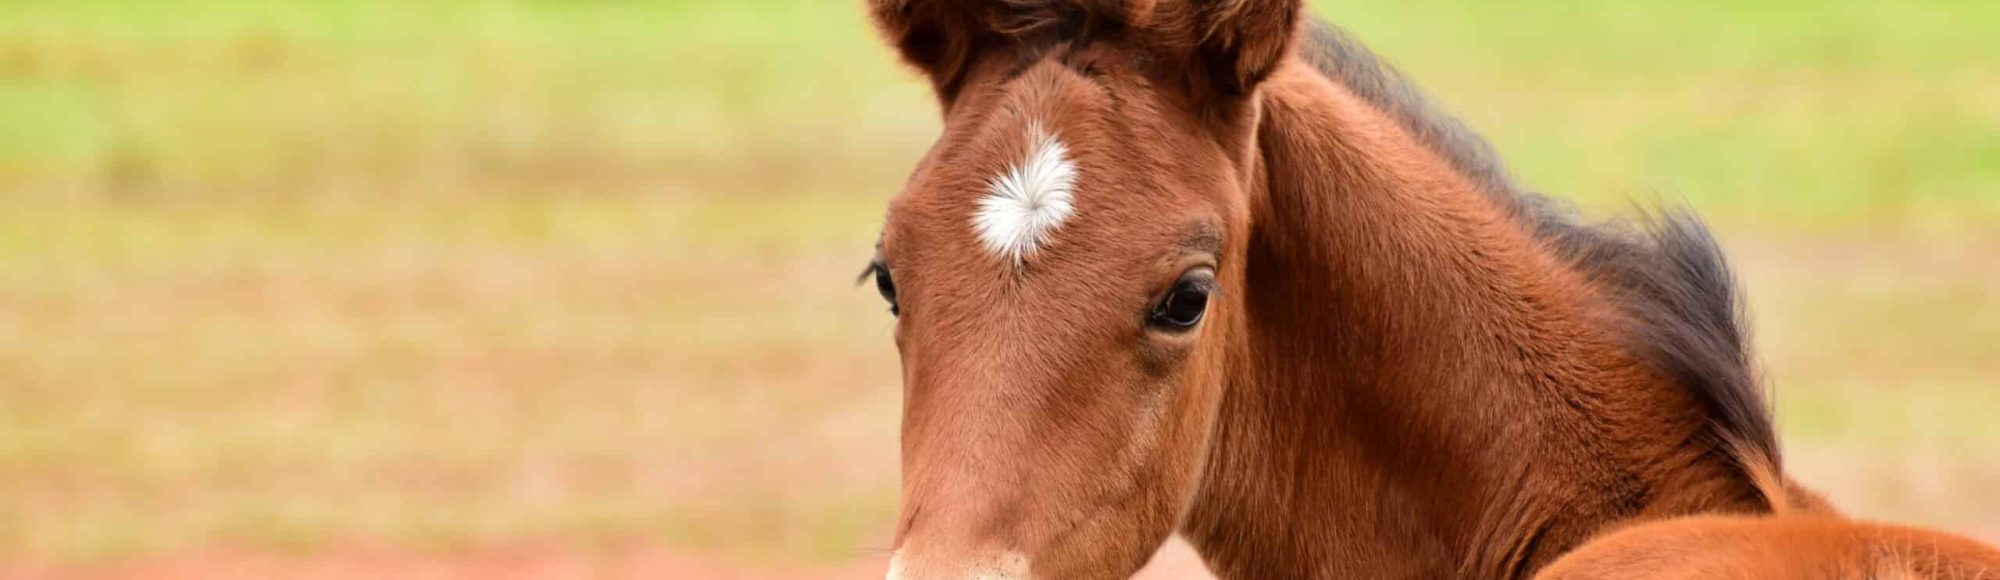 Light bay foal with star on forehead standing on a field